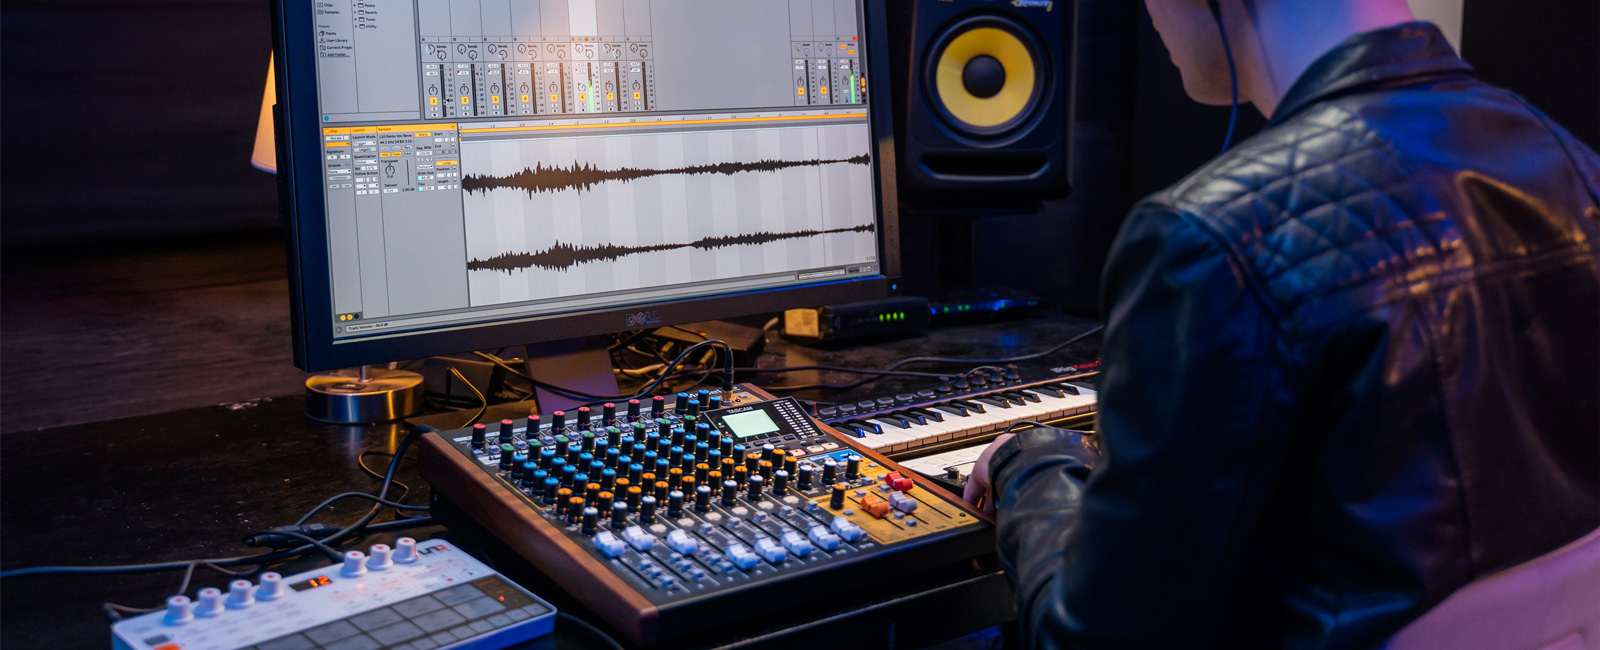 TASCAM Announces the Version 1.40 Firmware Update for the Model 12 Integrated Production Suite